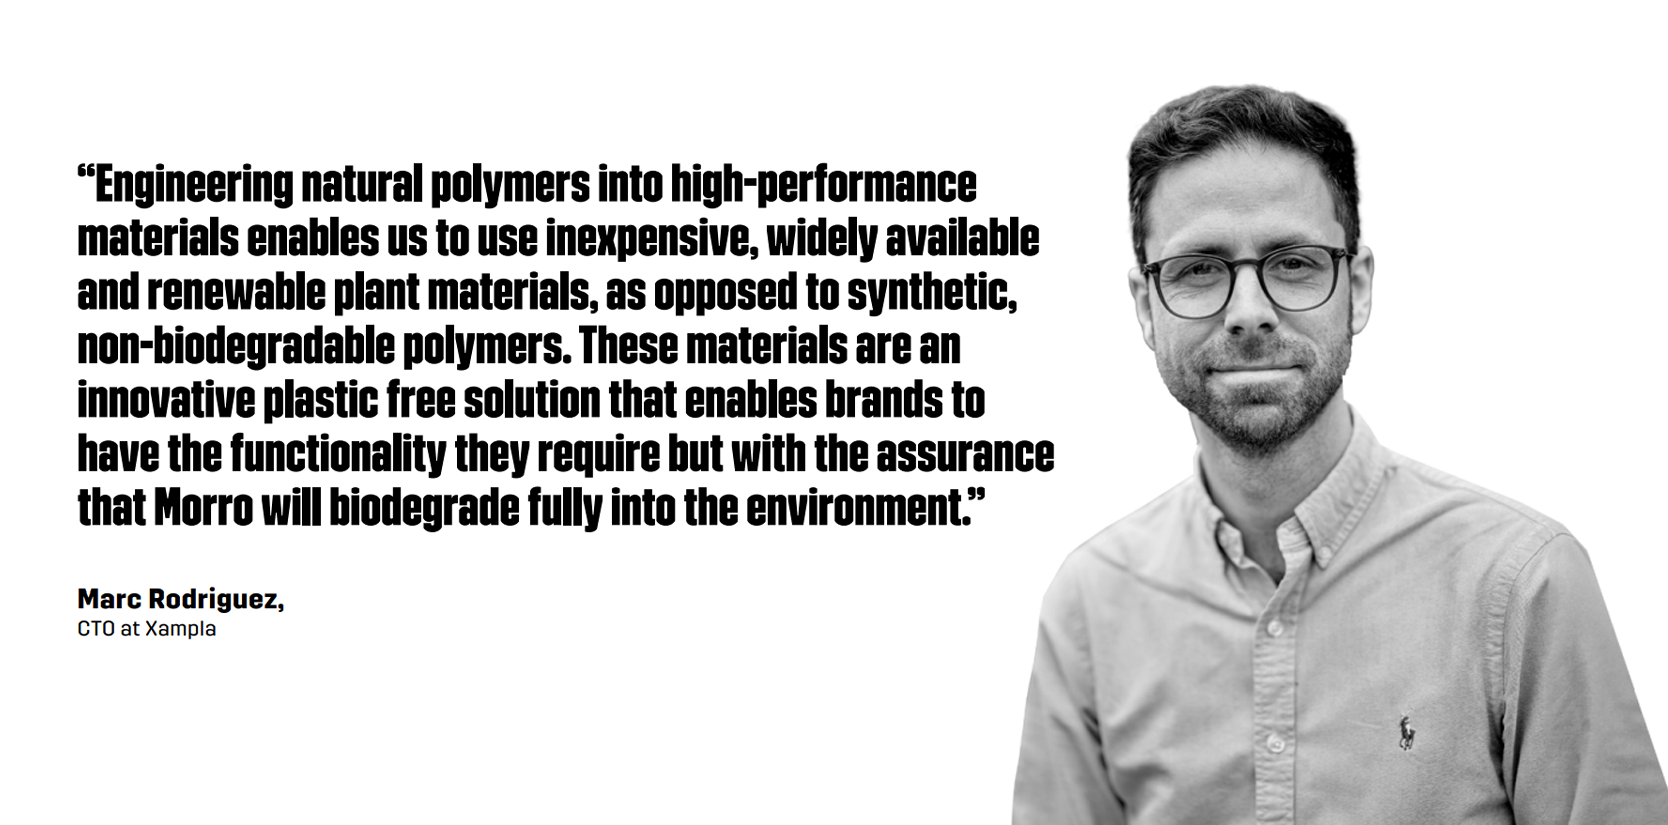 “Engineering natural polymers into high-performance materials enables us to use inexpensive, widely available and renewable plant materials, as opposed to synthetic, non-biodegradable polymers,” said Marc Rodriguez, CTO at Xampla. “These materials are an innovative plastic free solution that enables brands to have the functionality they require but with the assurance that Morro will biodegrade fully into the environment.”